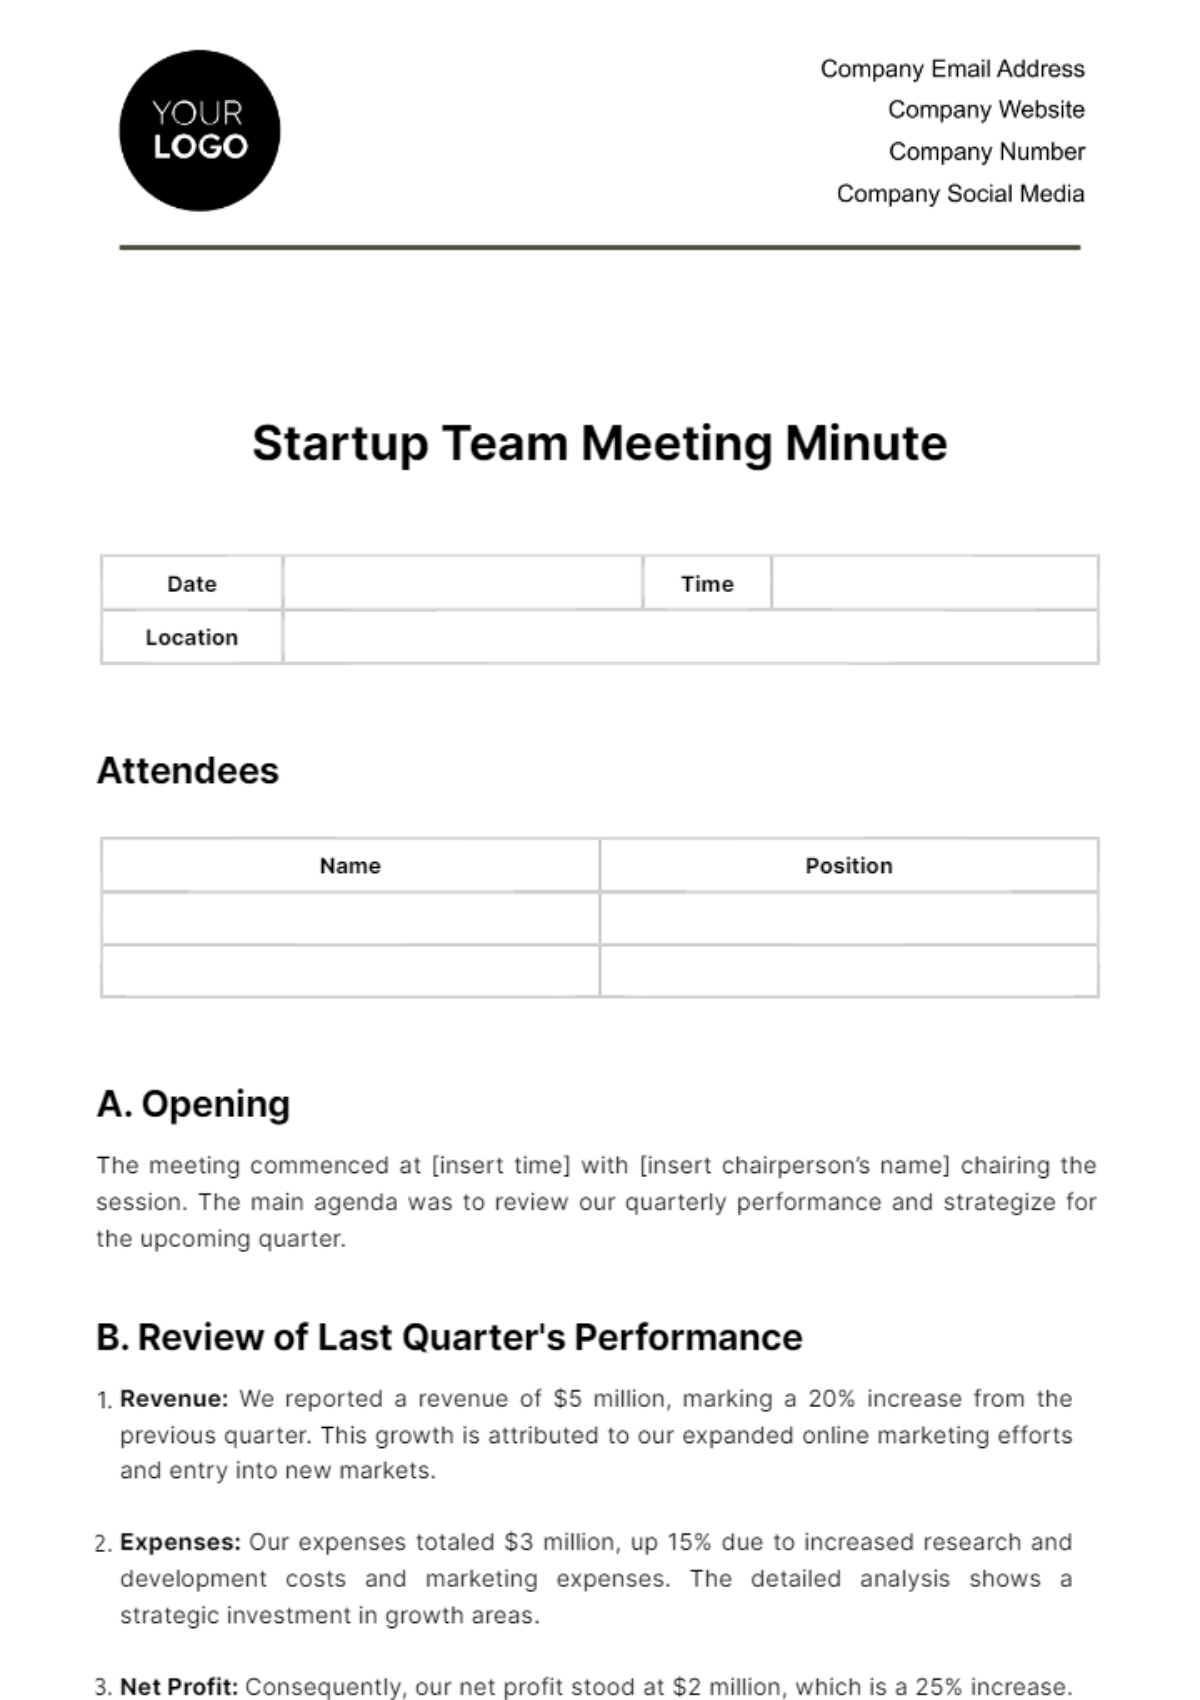 Startup Team Meeting Minute Template